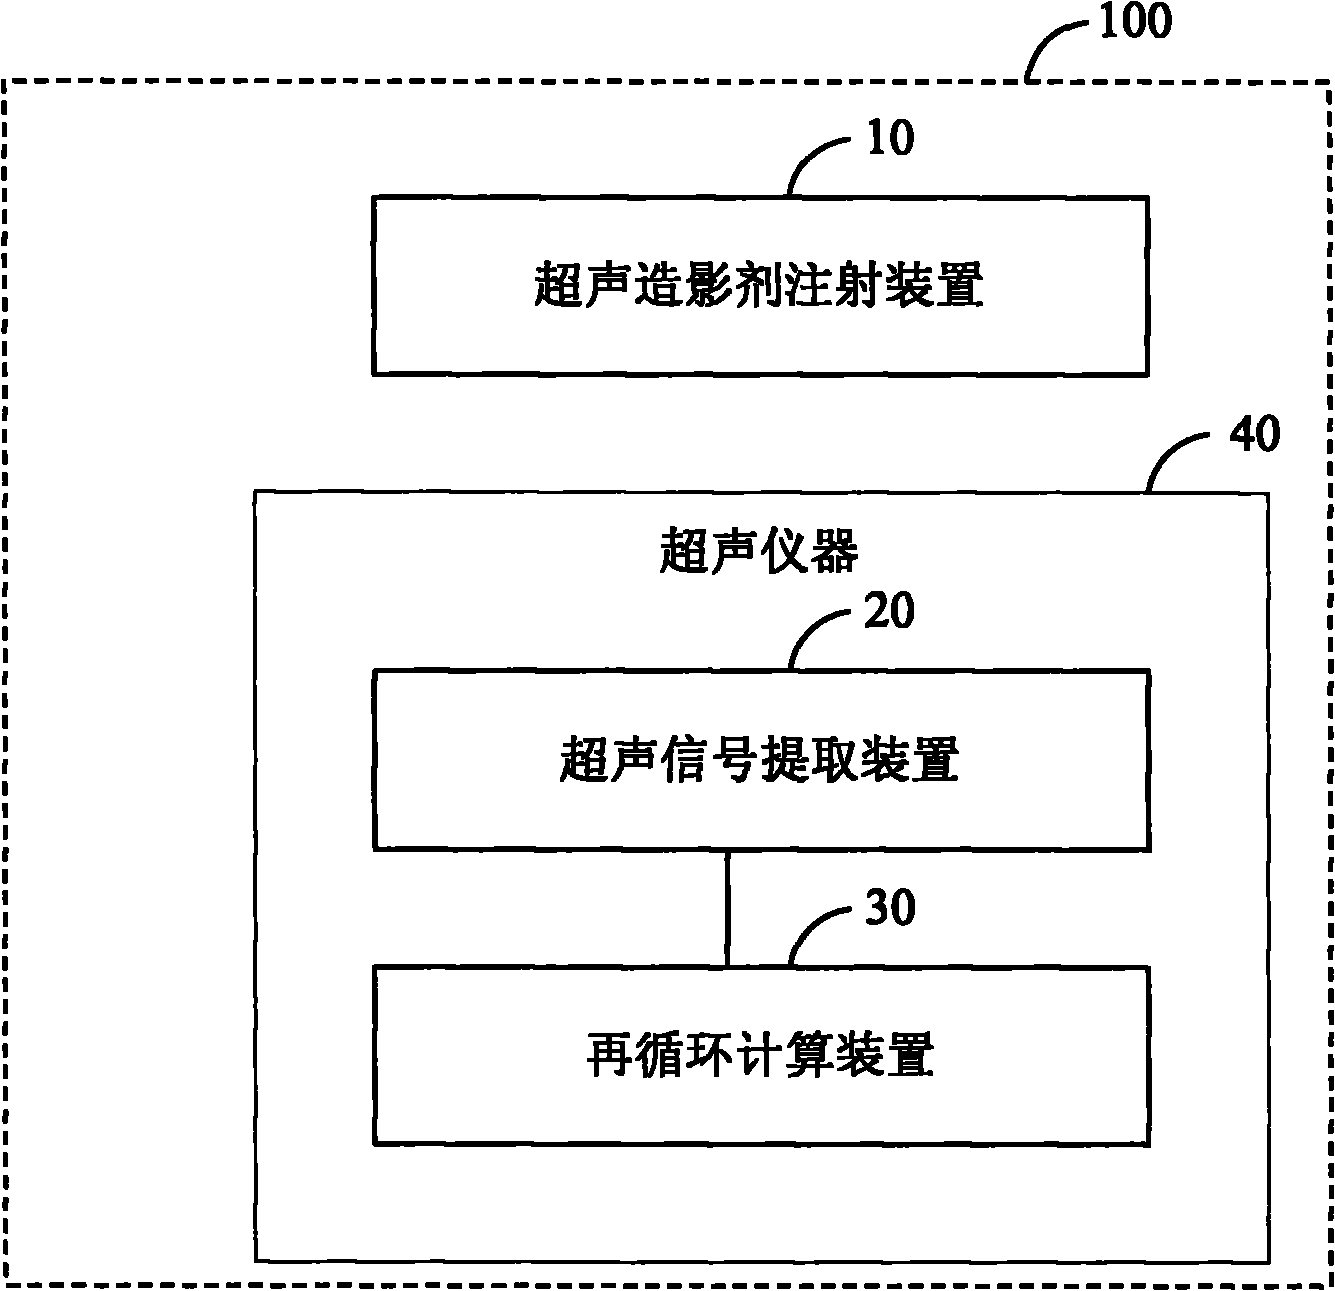 Method and system for measuring recirculation rate and/or recirculation volume of dialyzing access